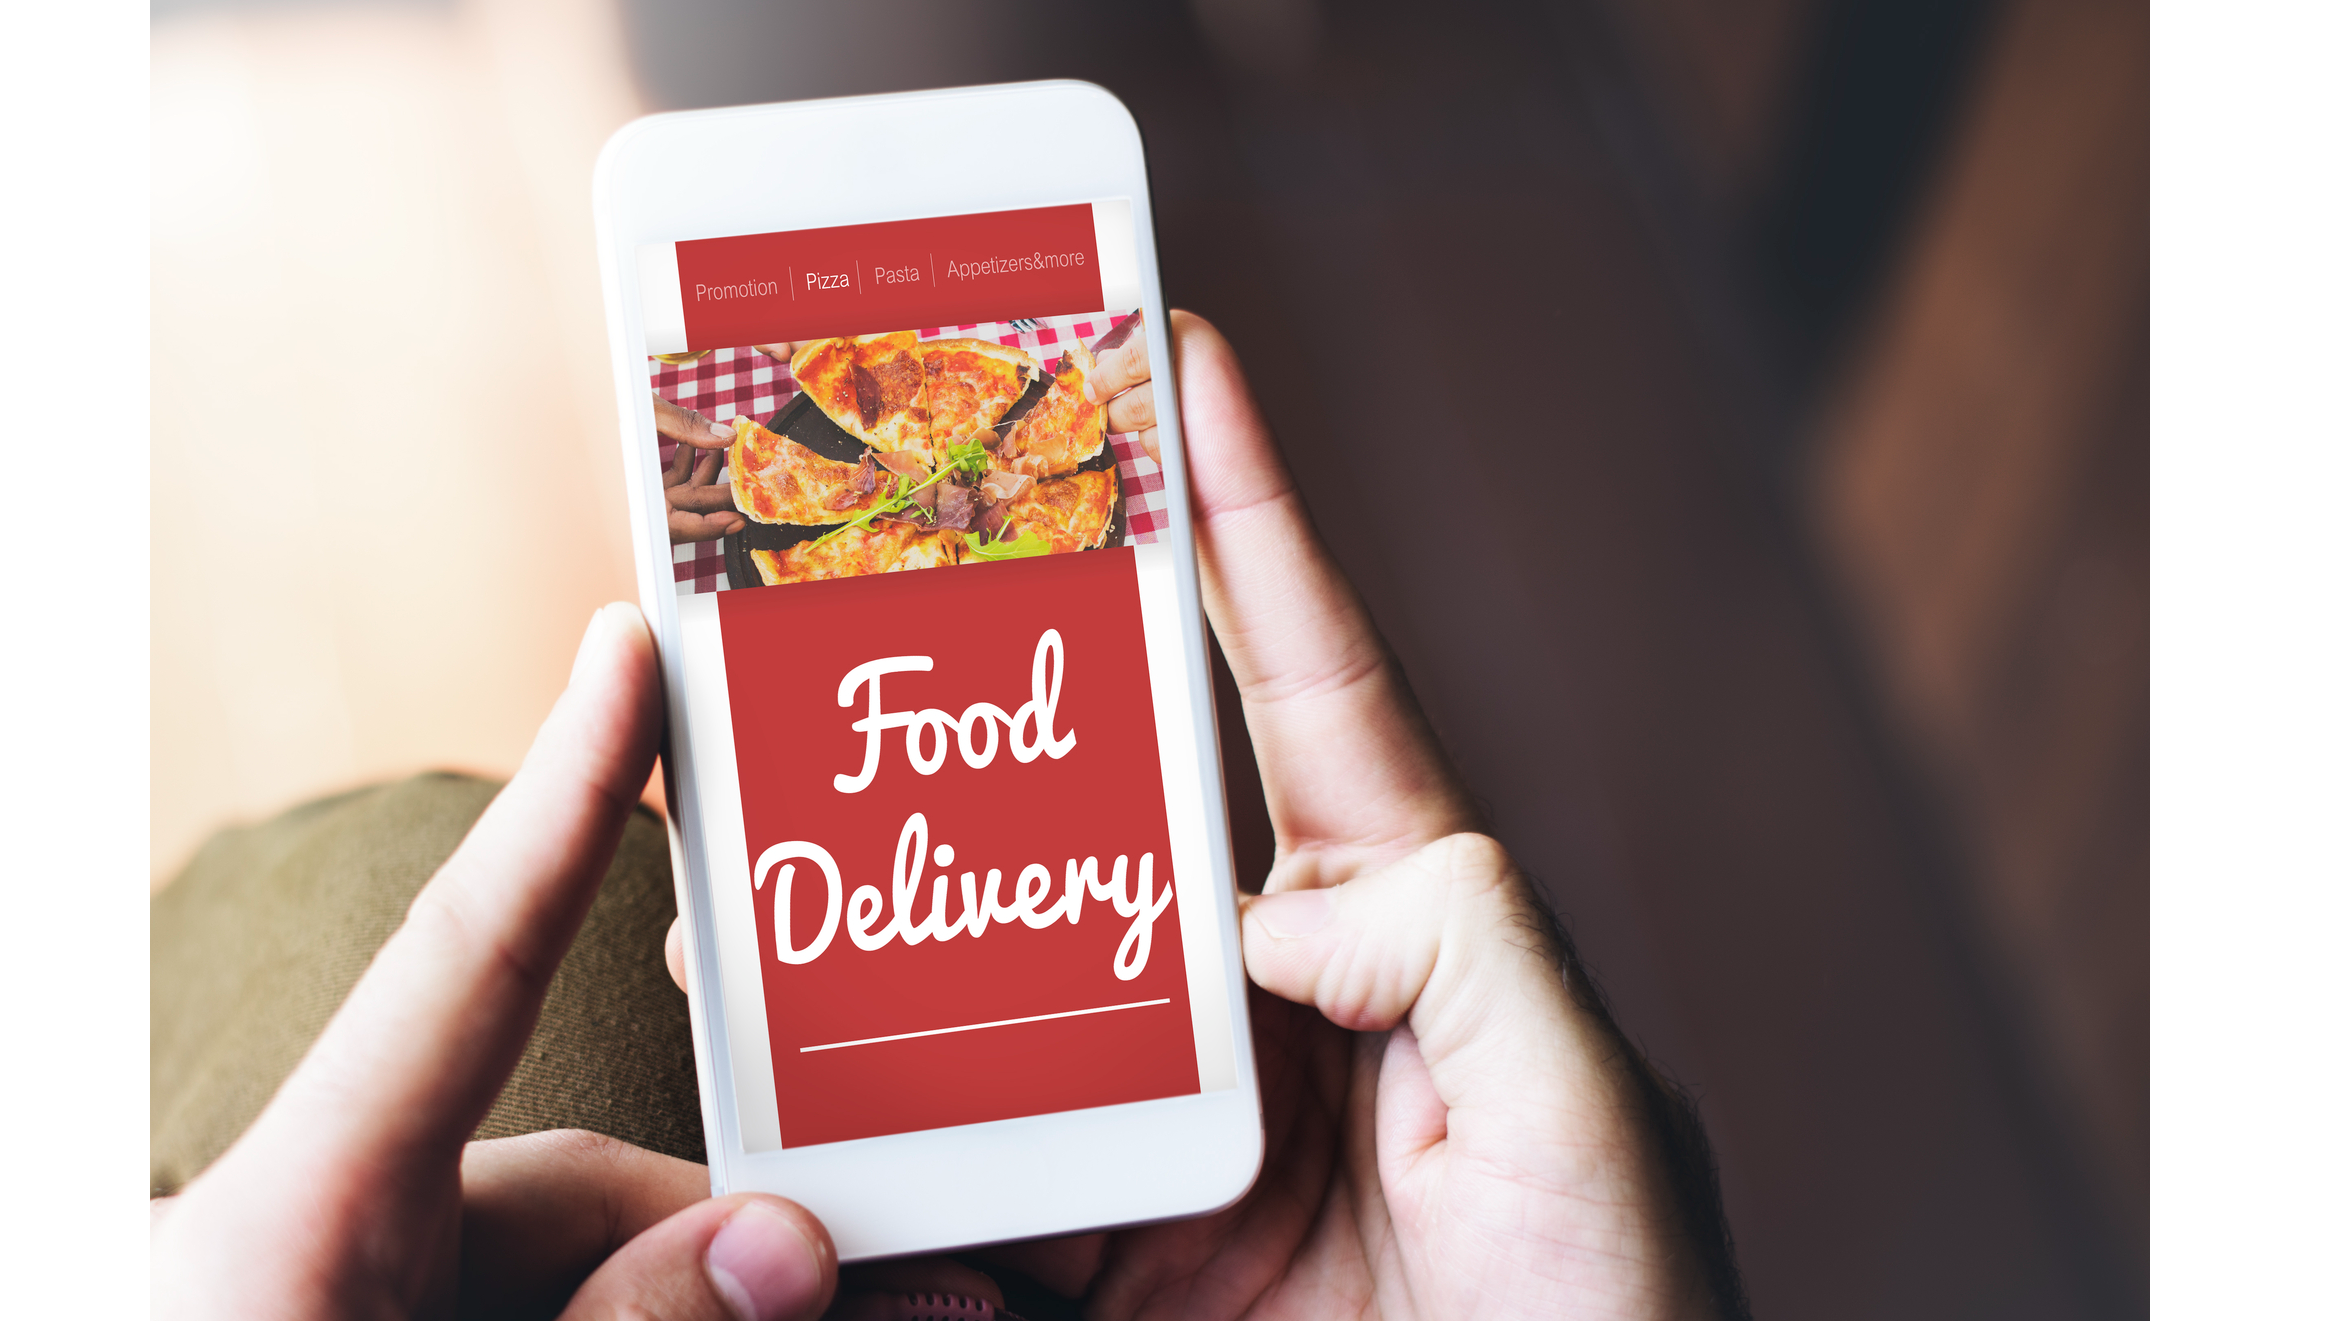 New Orleans Fast Food Delivery Platform With Flat Rate Cuts Restaurant Expenses